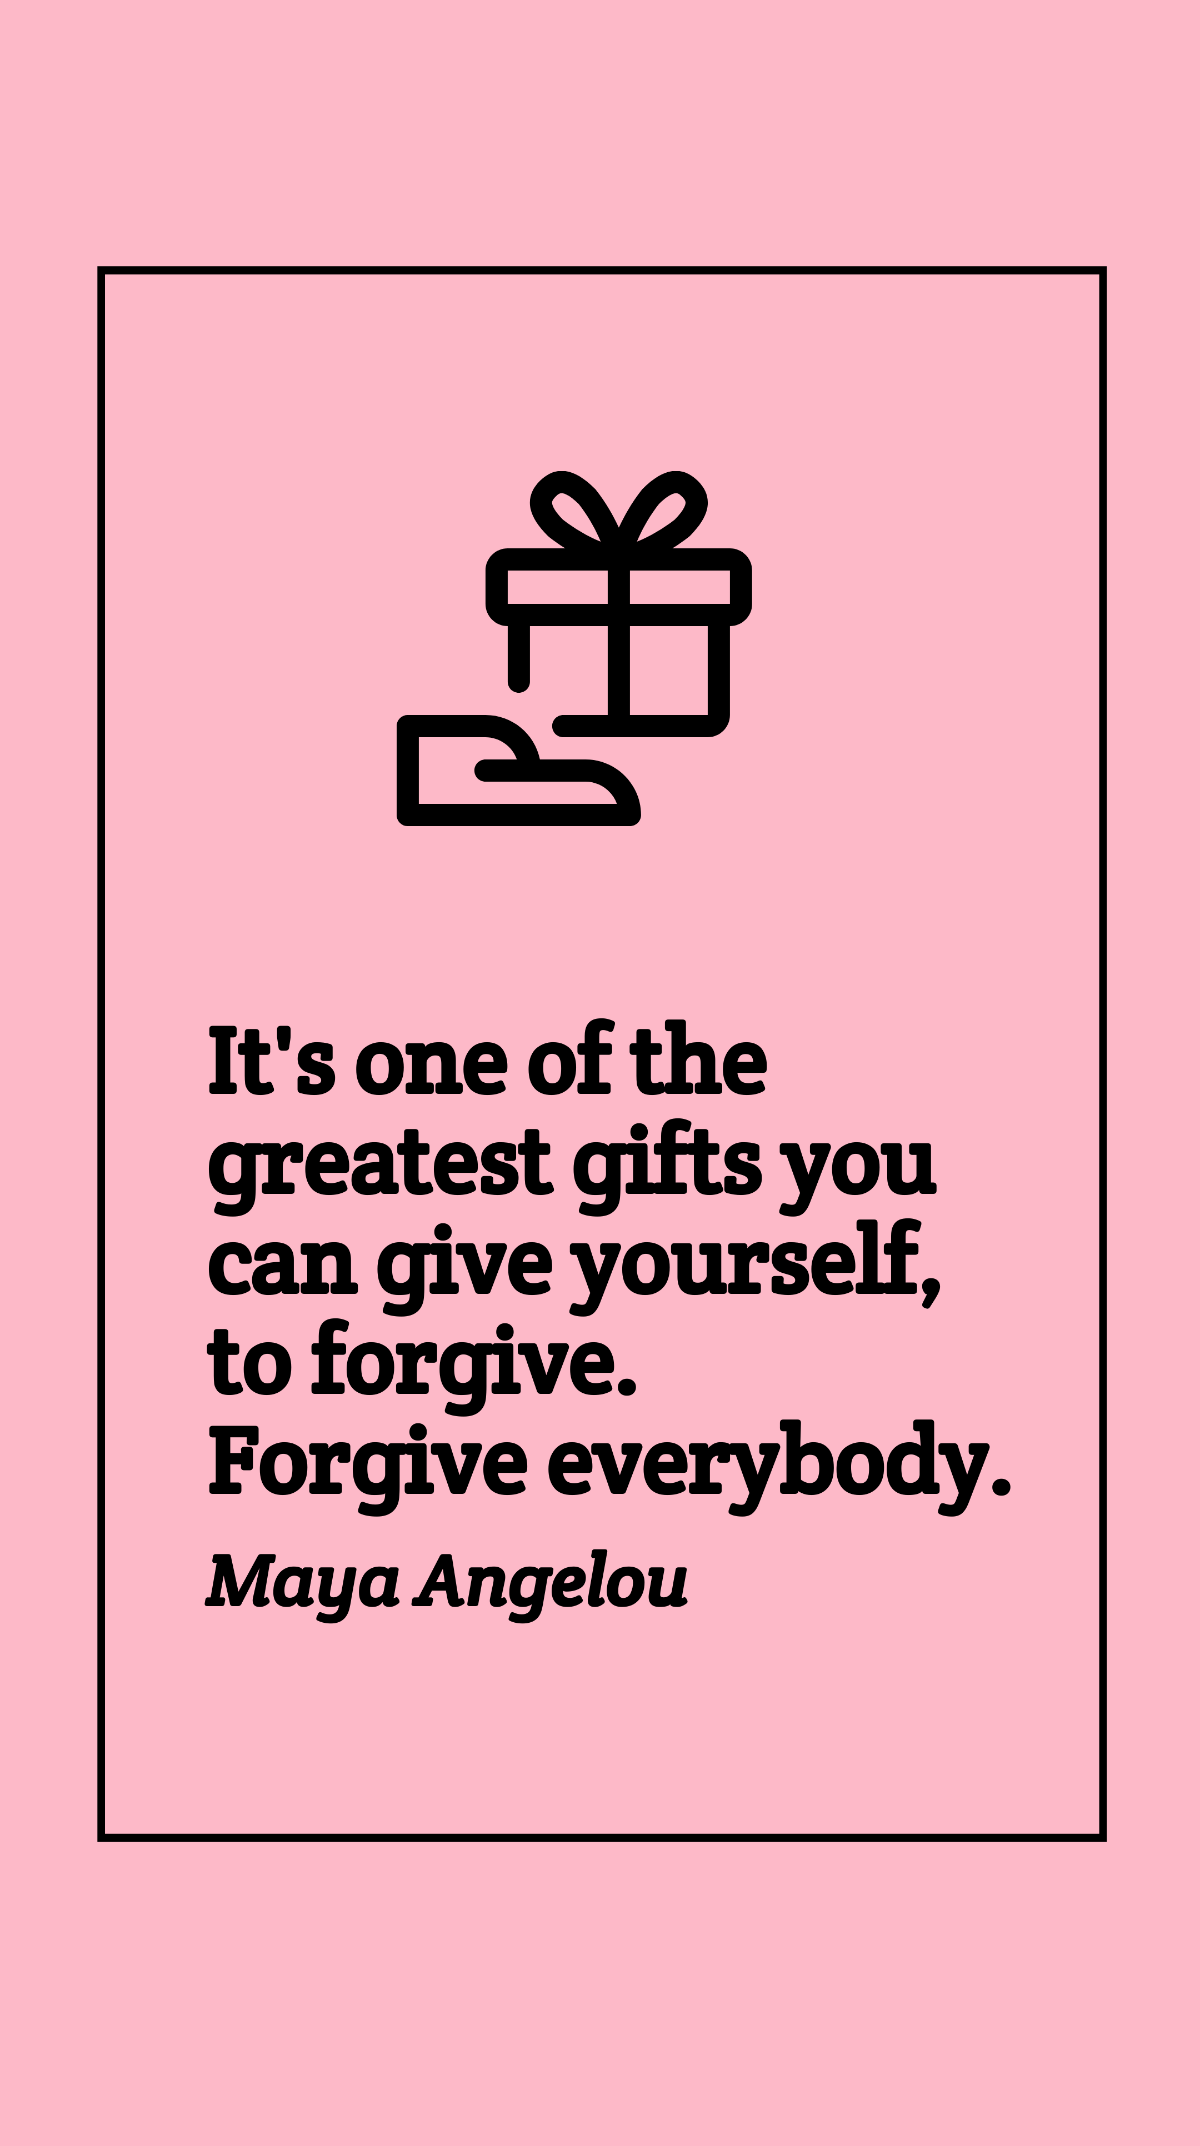 Maya Angelou - It's one of the greatest gifts you can give yourself, to forgive. Forgive everybody.